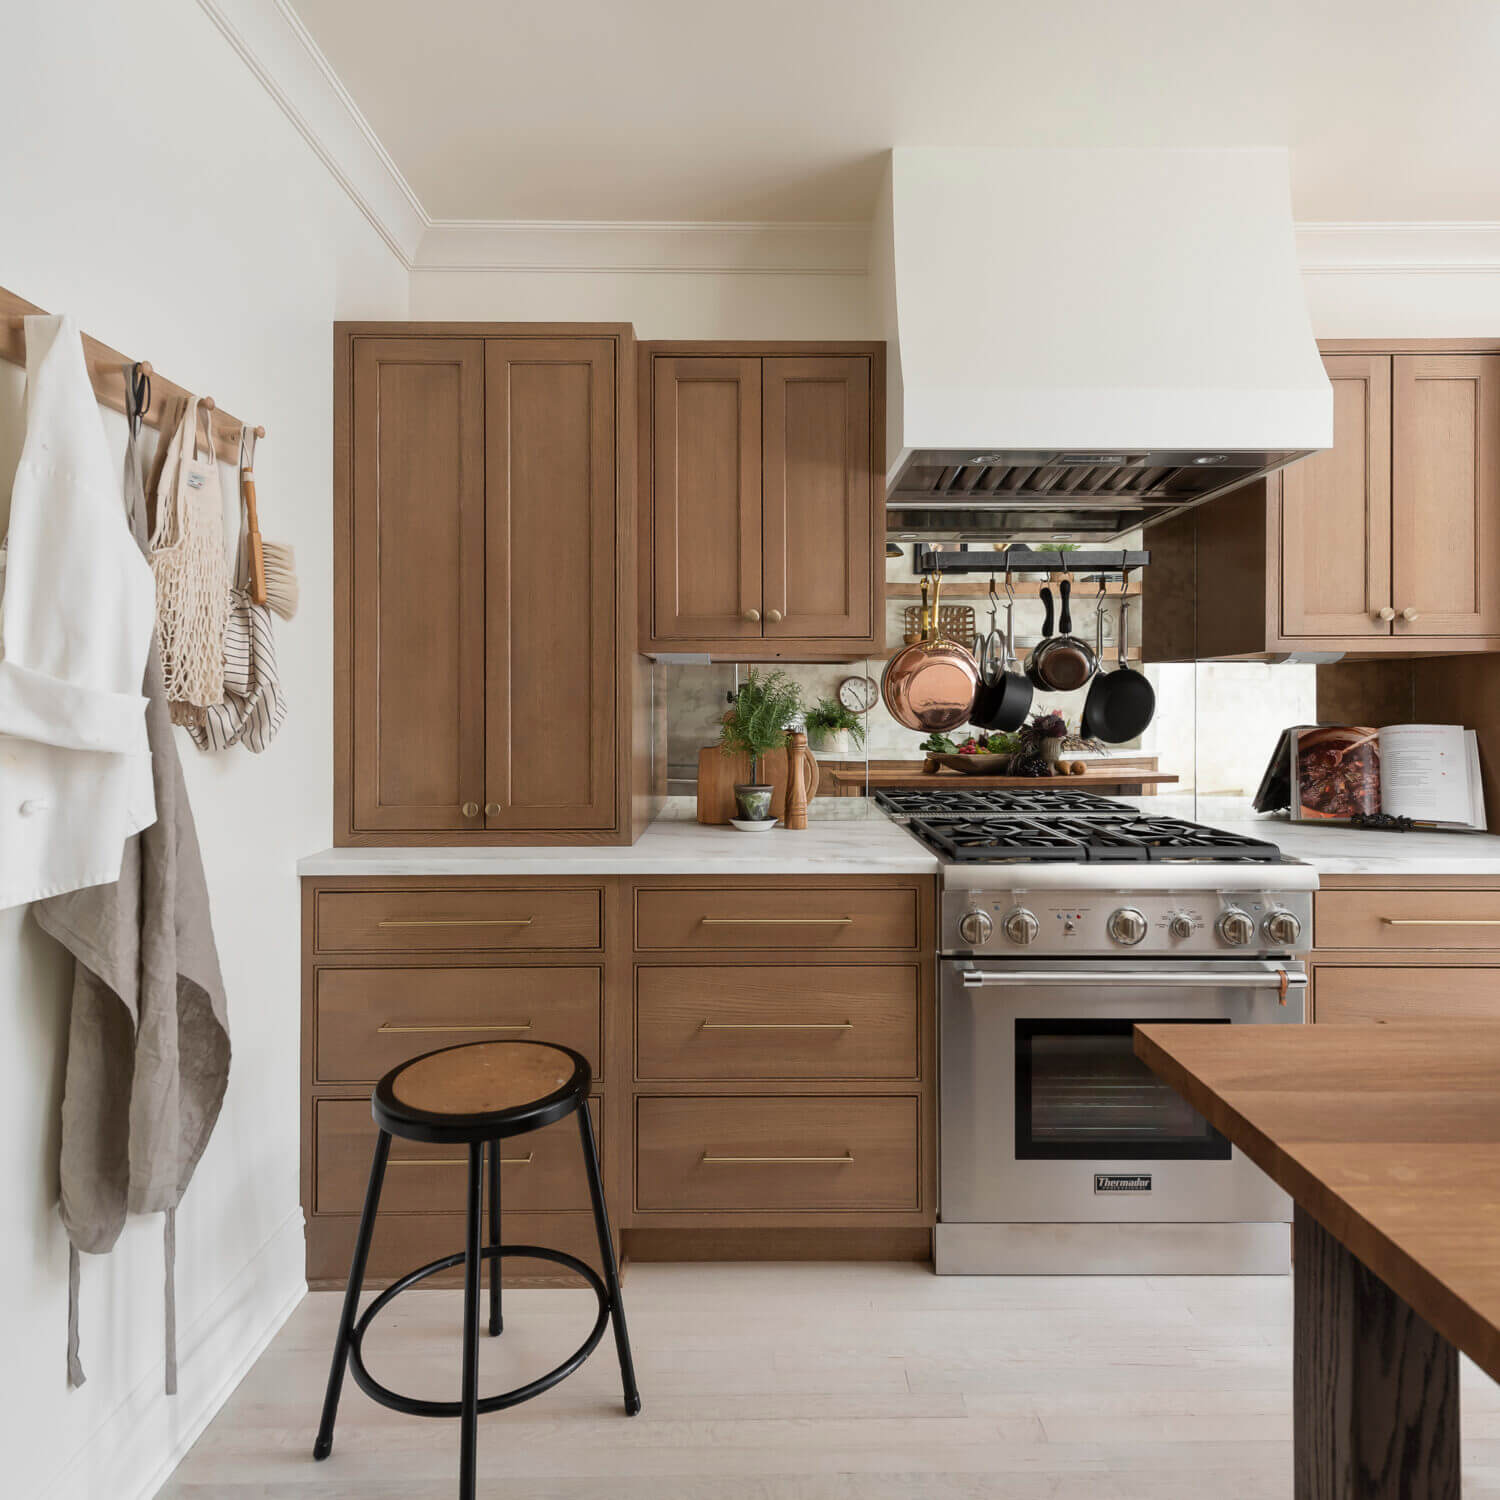 A stunning remodeled kitchen with light stained wood cabinets from Dura Supreme cabinetry. The kitchen also features a bright white modern wood hood and a mirror backsplash.